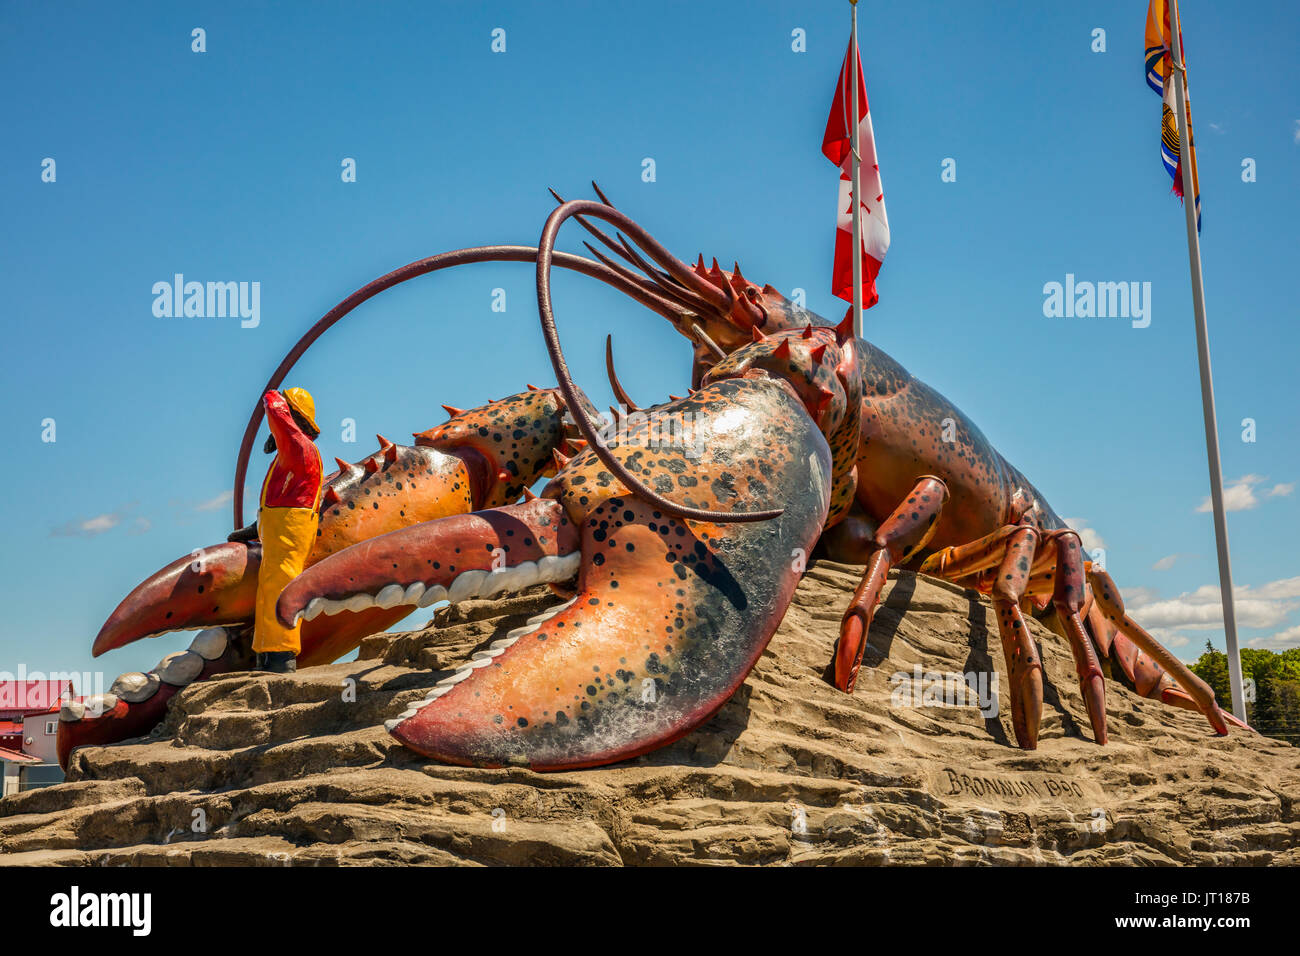 Lobster Capital of the World, Shediac is a Canadian town that boasts 'The World's Largest Lobster' weighing in at 90-tonnes. Stock Photo